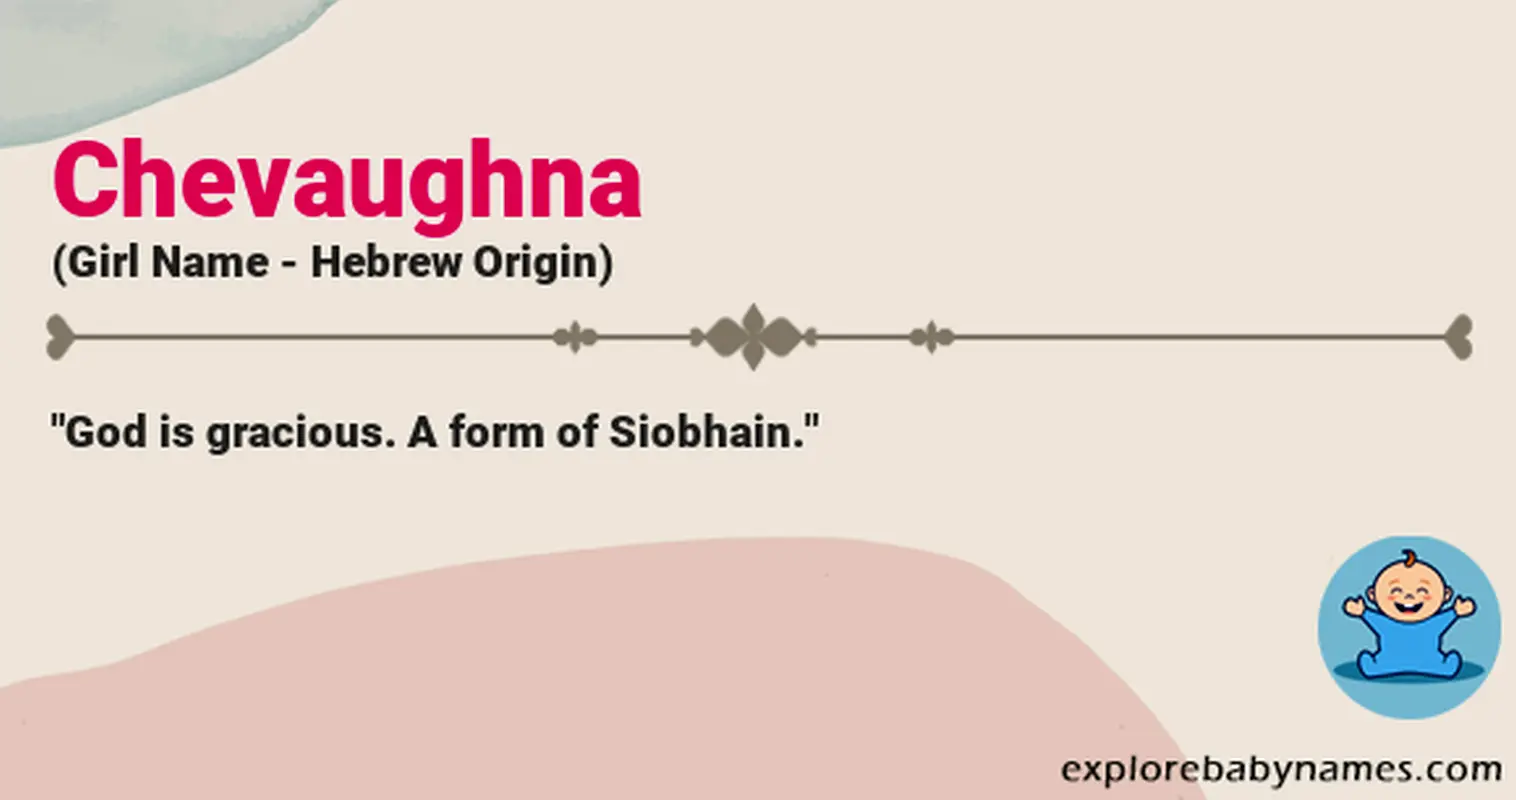 Meaning of Chevaughna